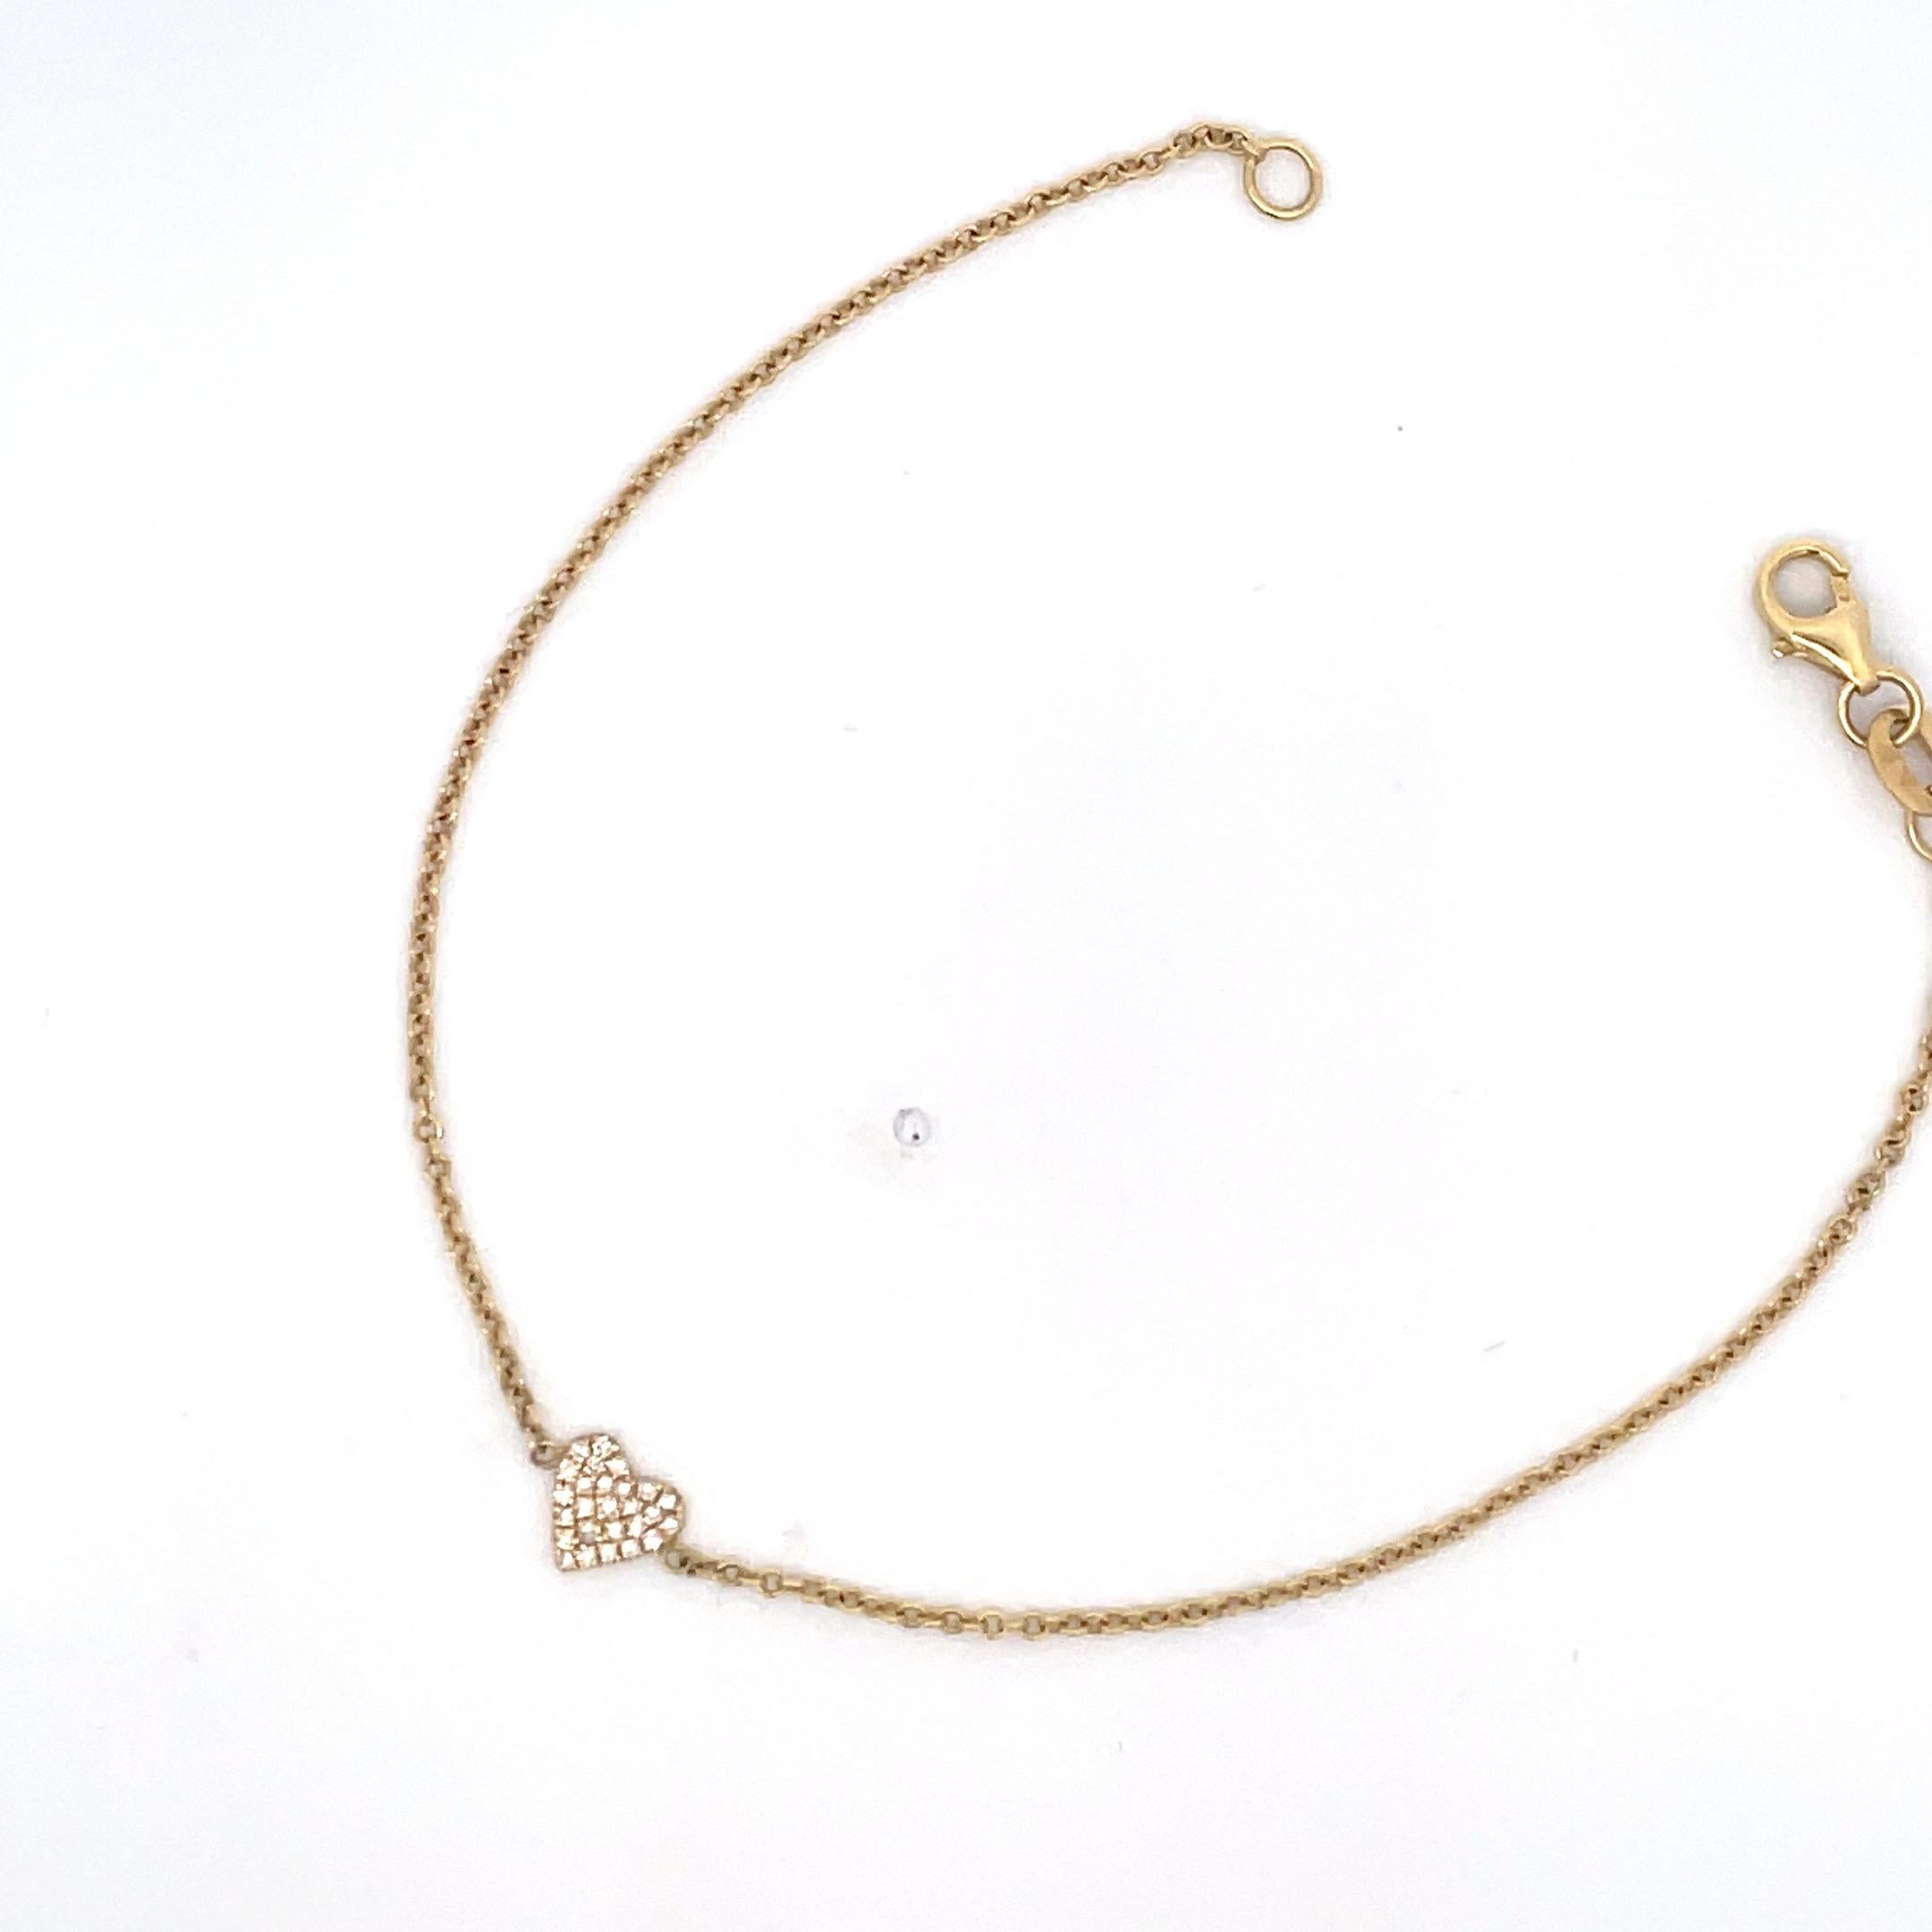 Dainty 14 Karat Yellow gold bracelet featuring a small diamond heart weighing 0.20 carats. 
Great to stack or wear alone. 